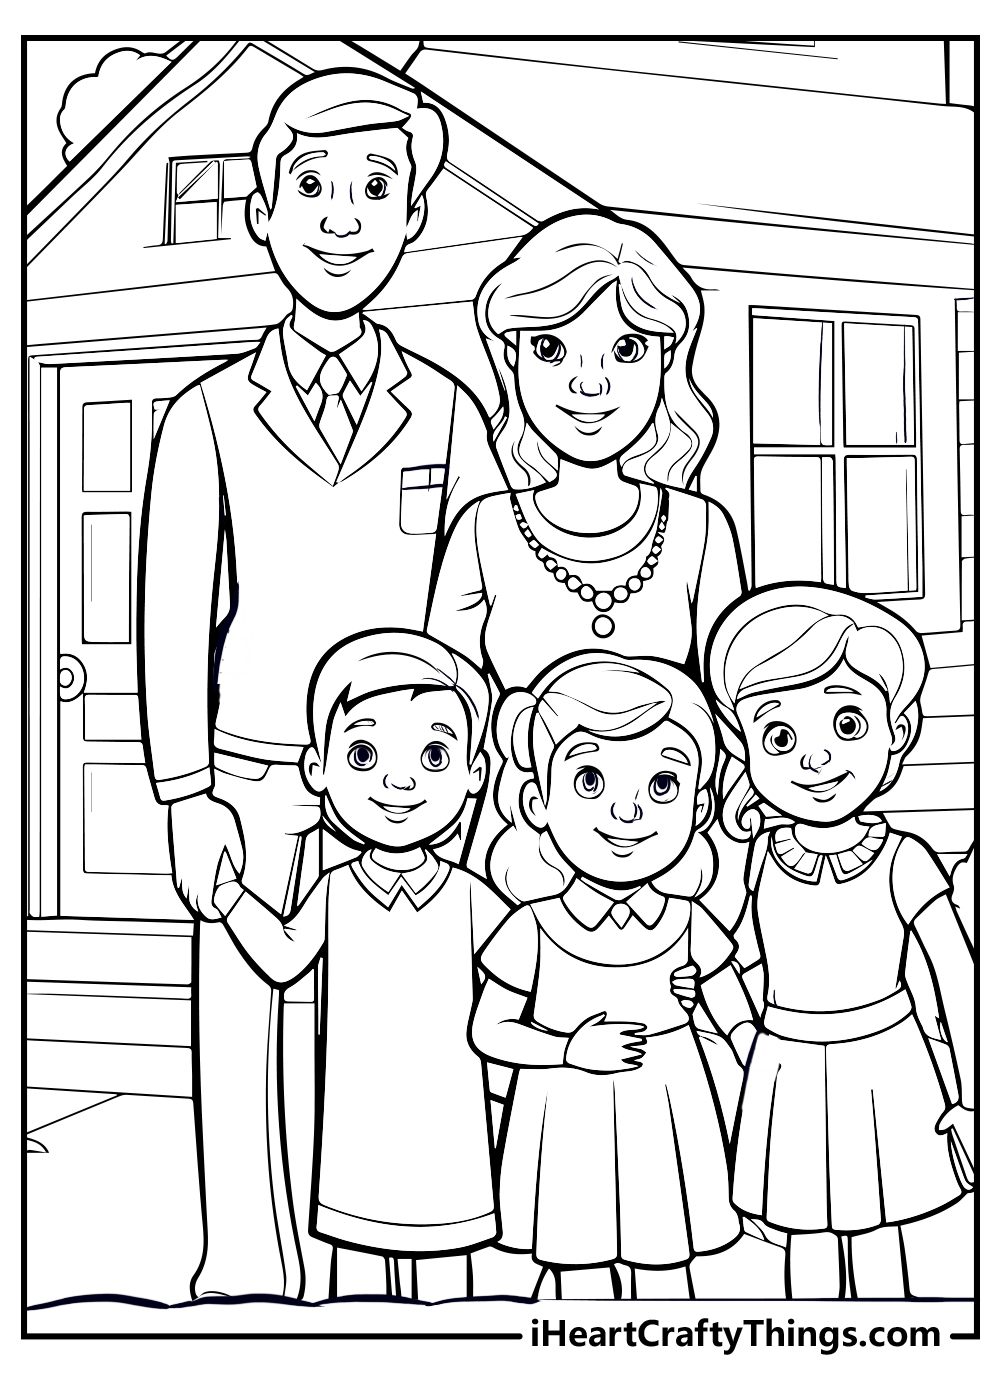 Printable family coloring pages updated